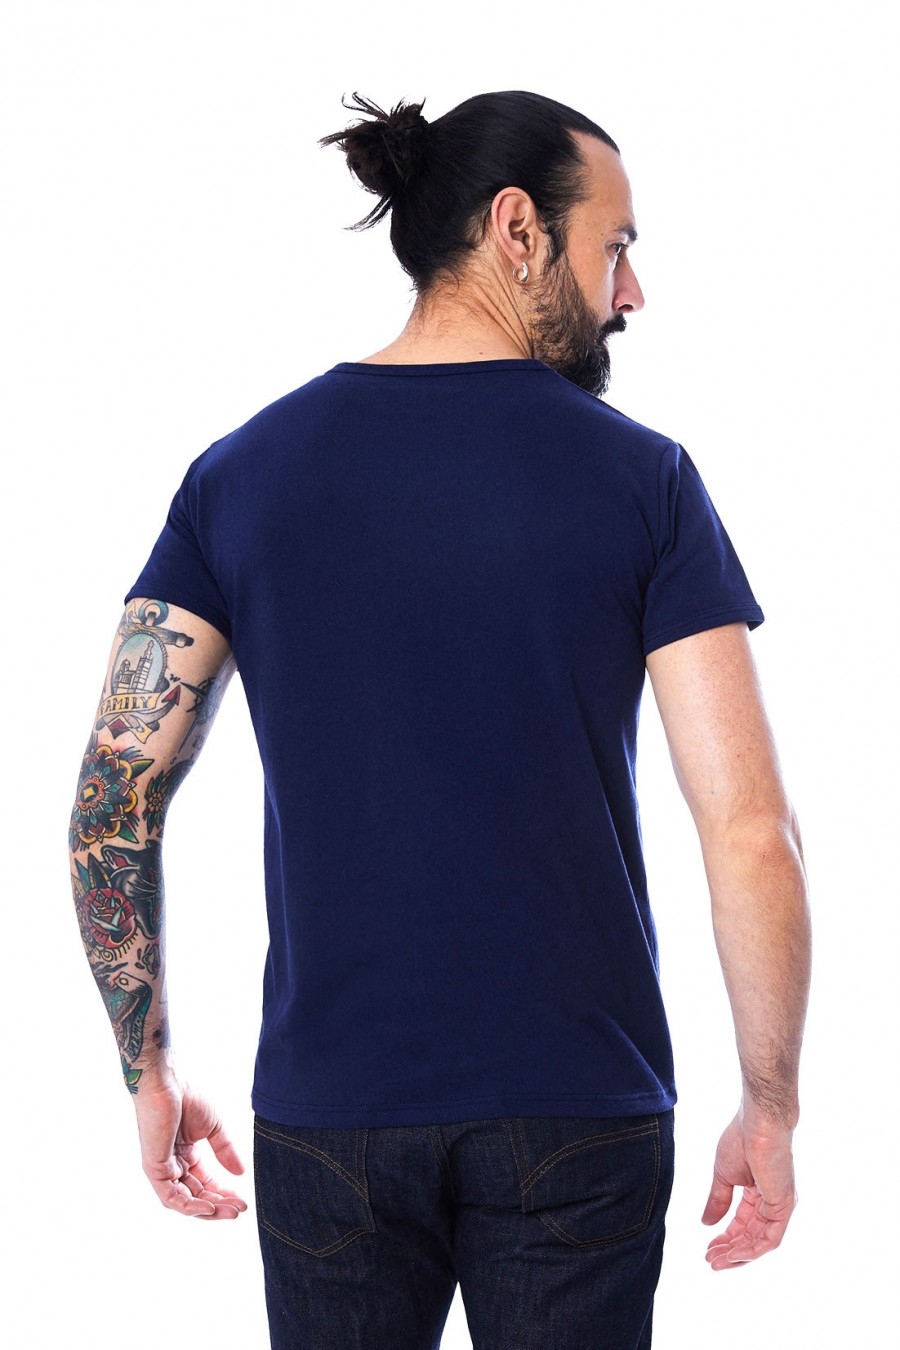 T-SHIRT HOMME MANCHE COURTE COL V BLEU ROI - Made in France & 100% Recyclé